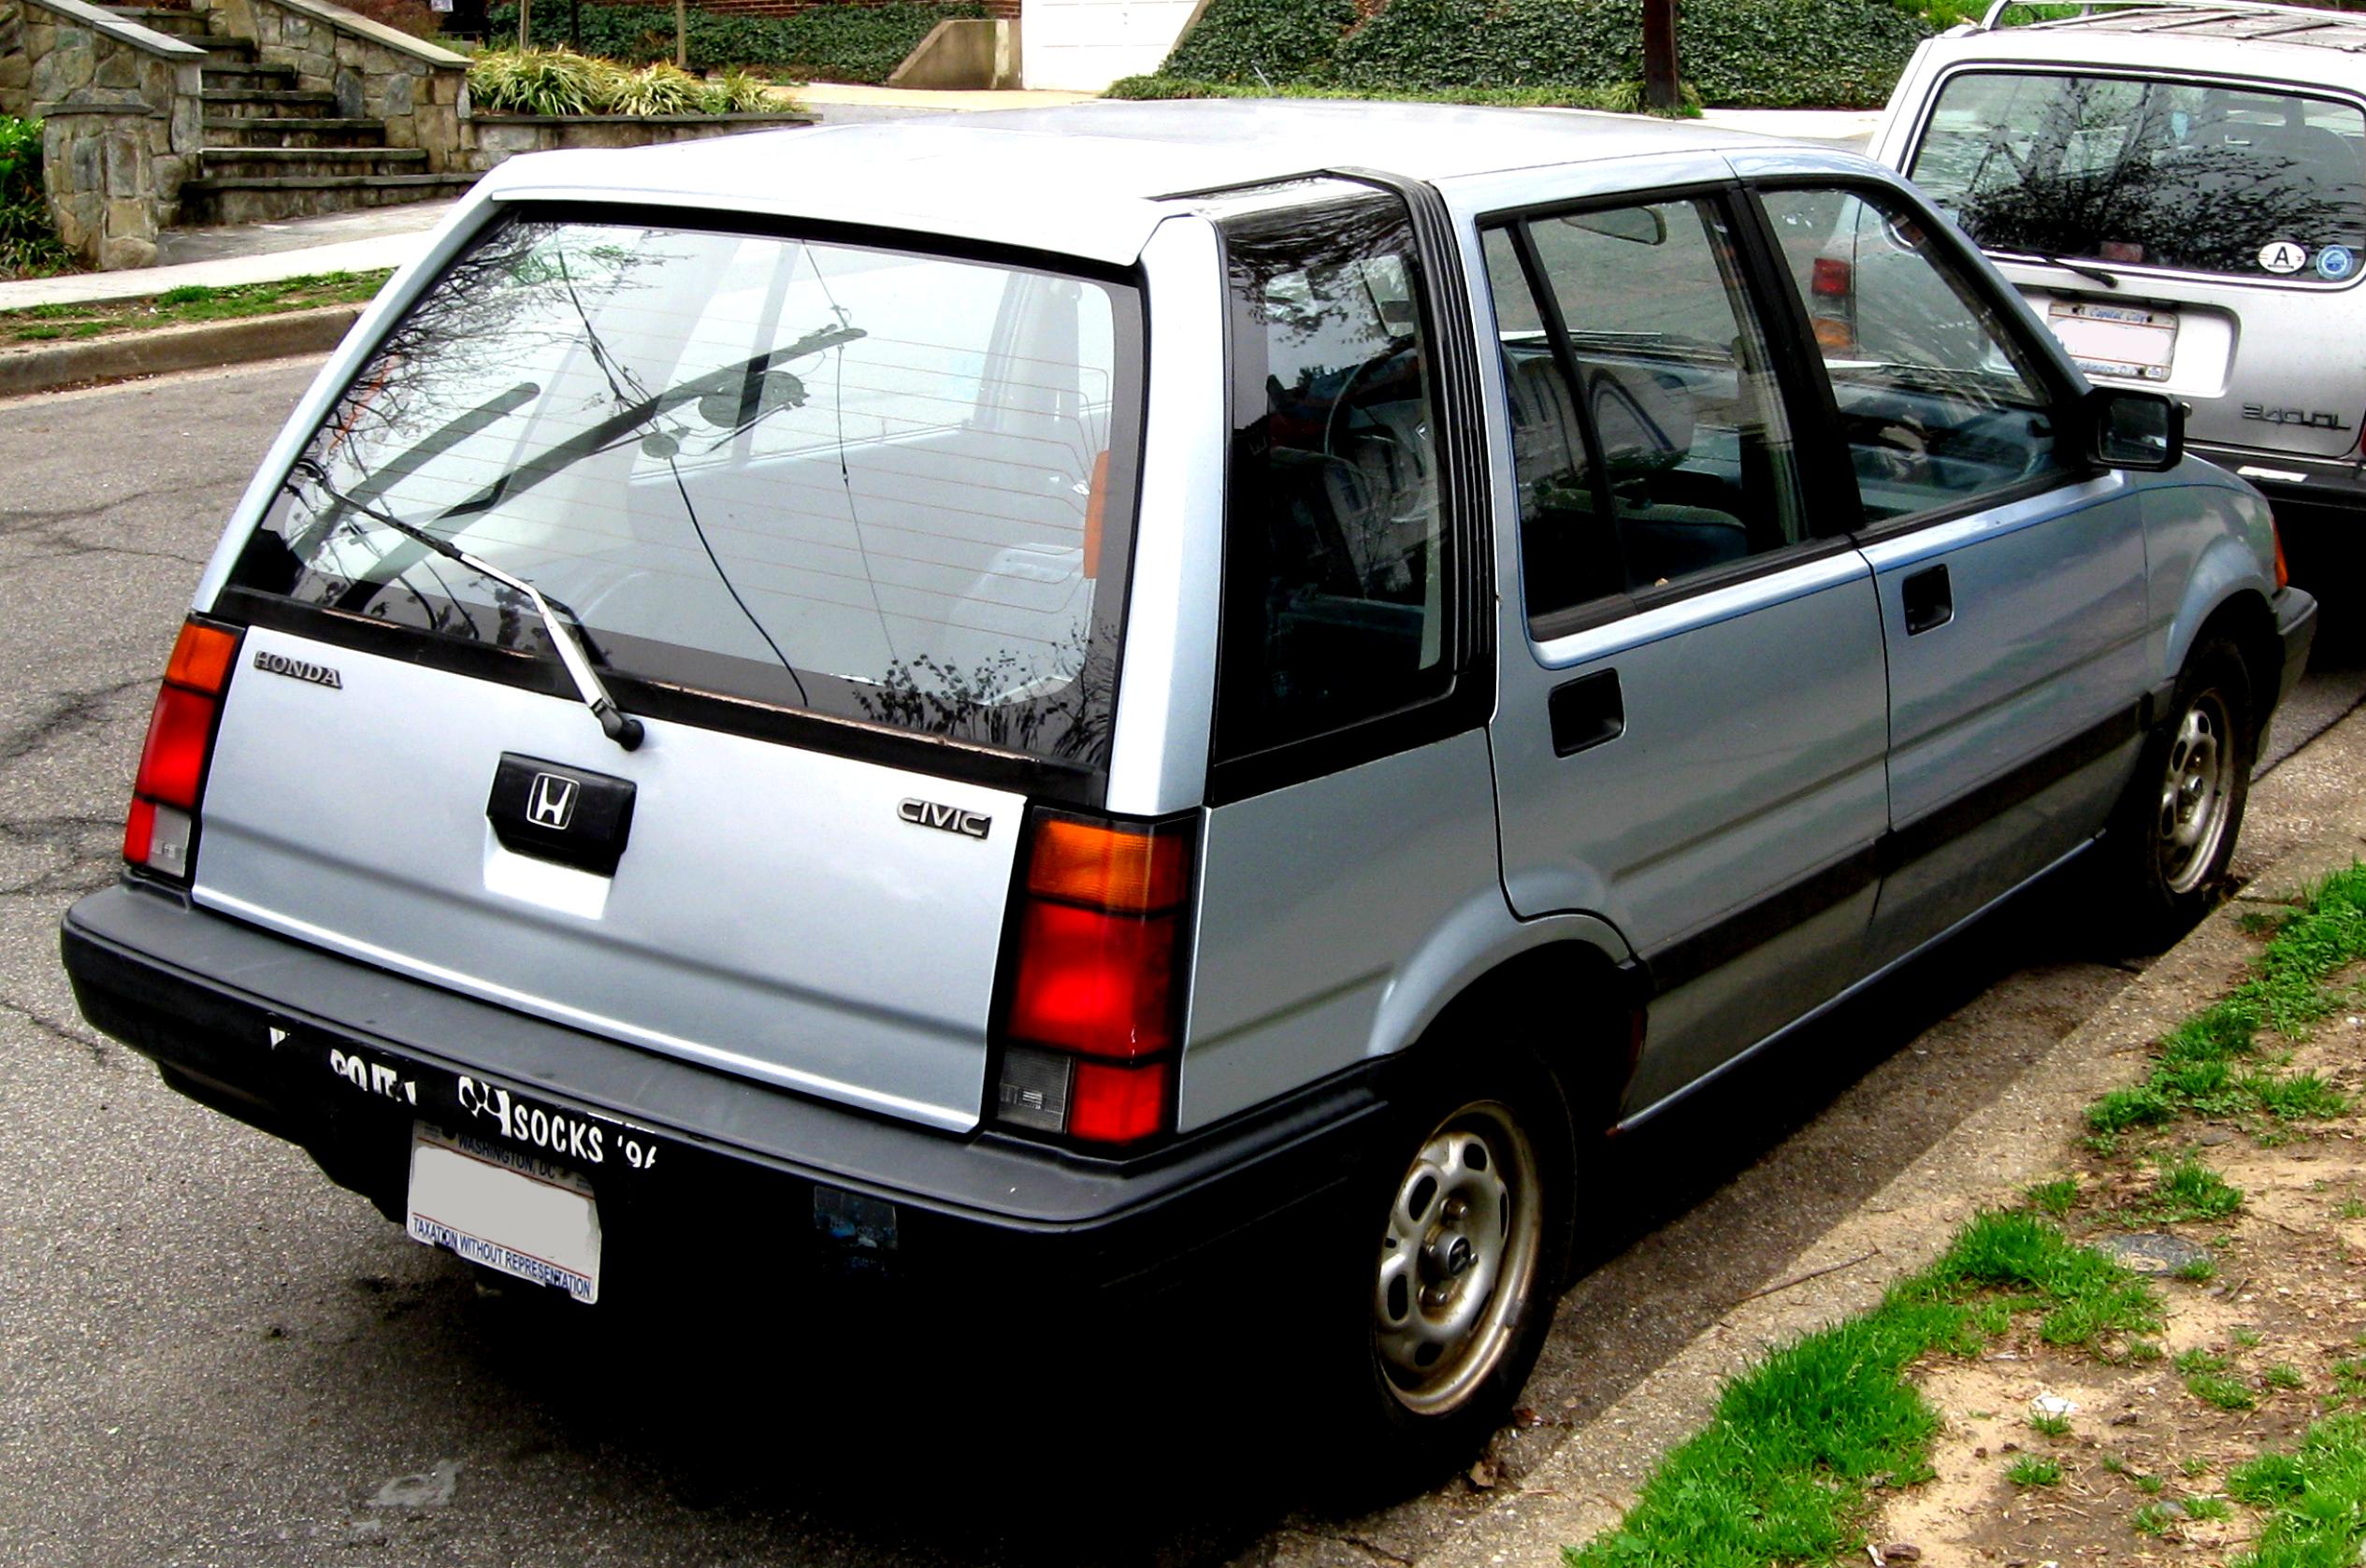 Civic shuttle. Honda Civic Shuttle 4wd. Honda Civic Shuttle 4wd 1987. Honda Civic 3 Shuttle. Honda Civic Shuttle 4wd 1985.